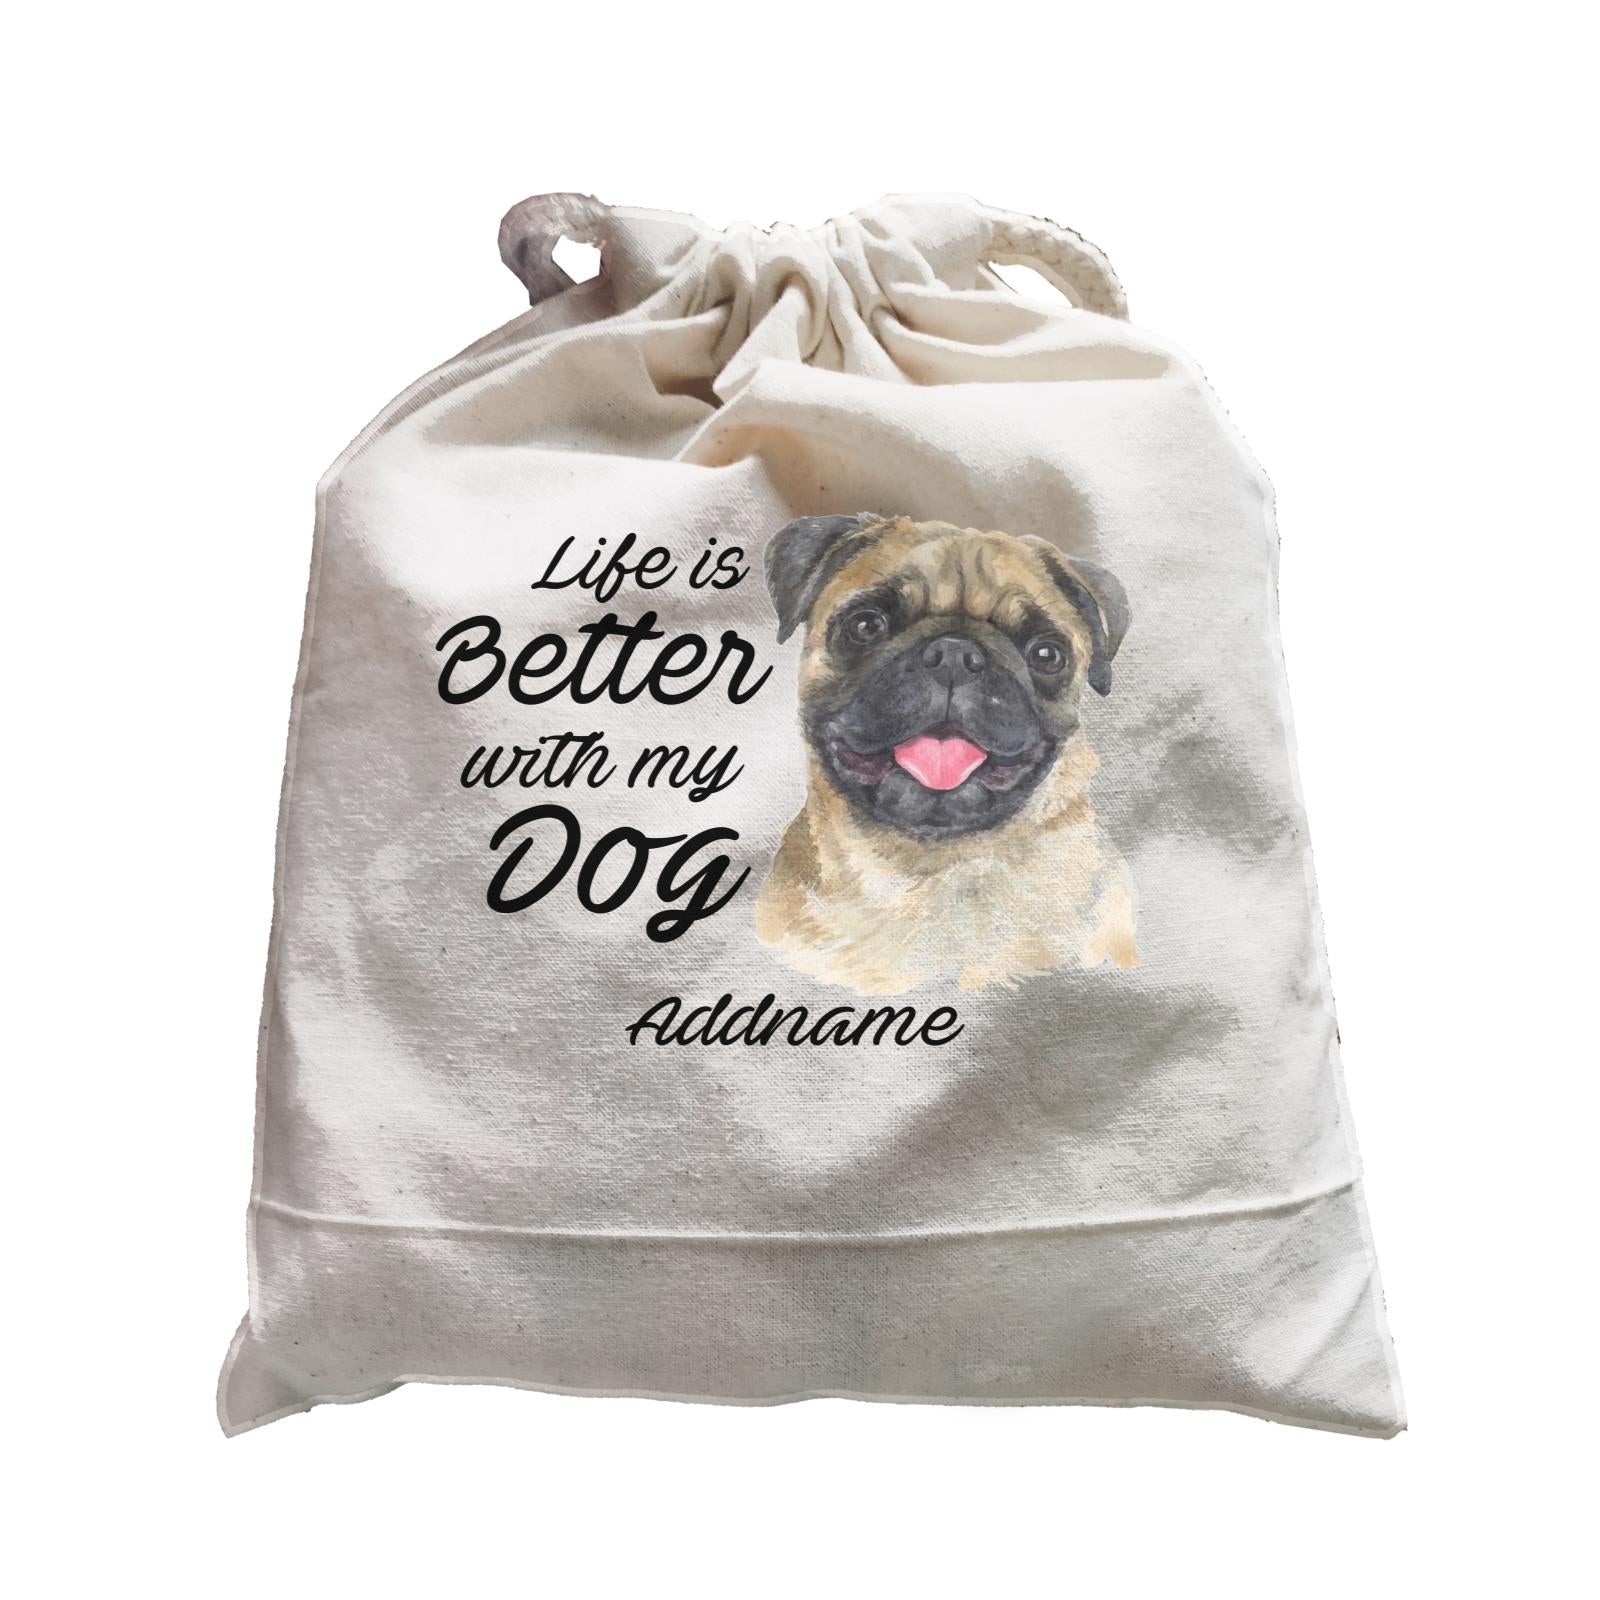 Watercolor Life is Better With My Dog Pug Addname Satchel